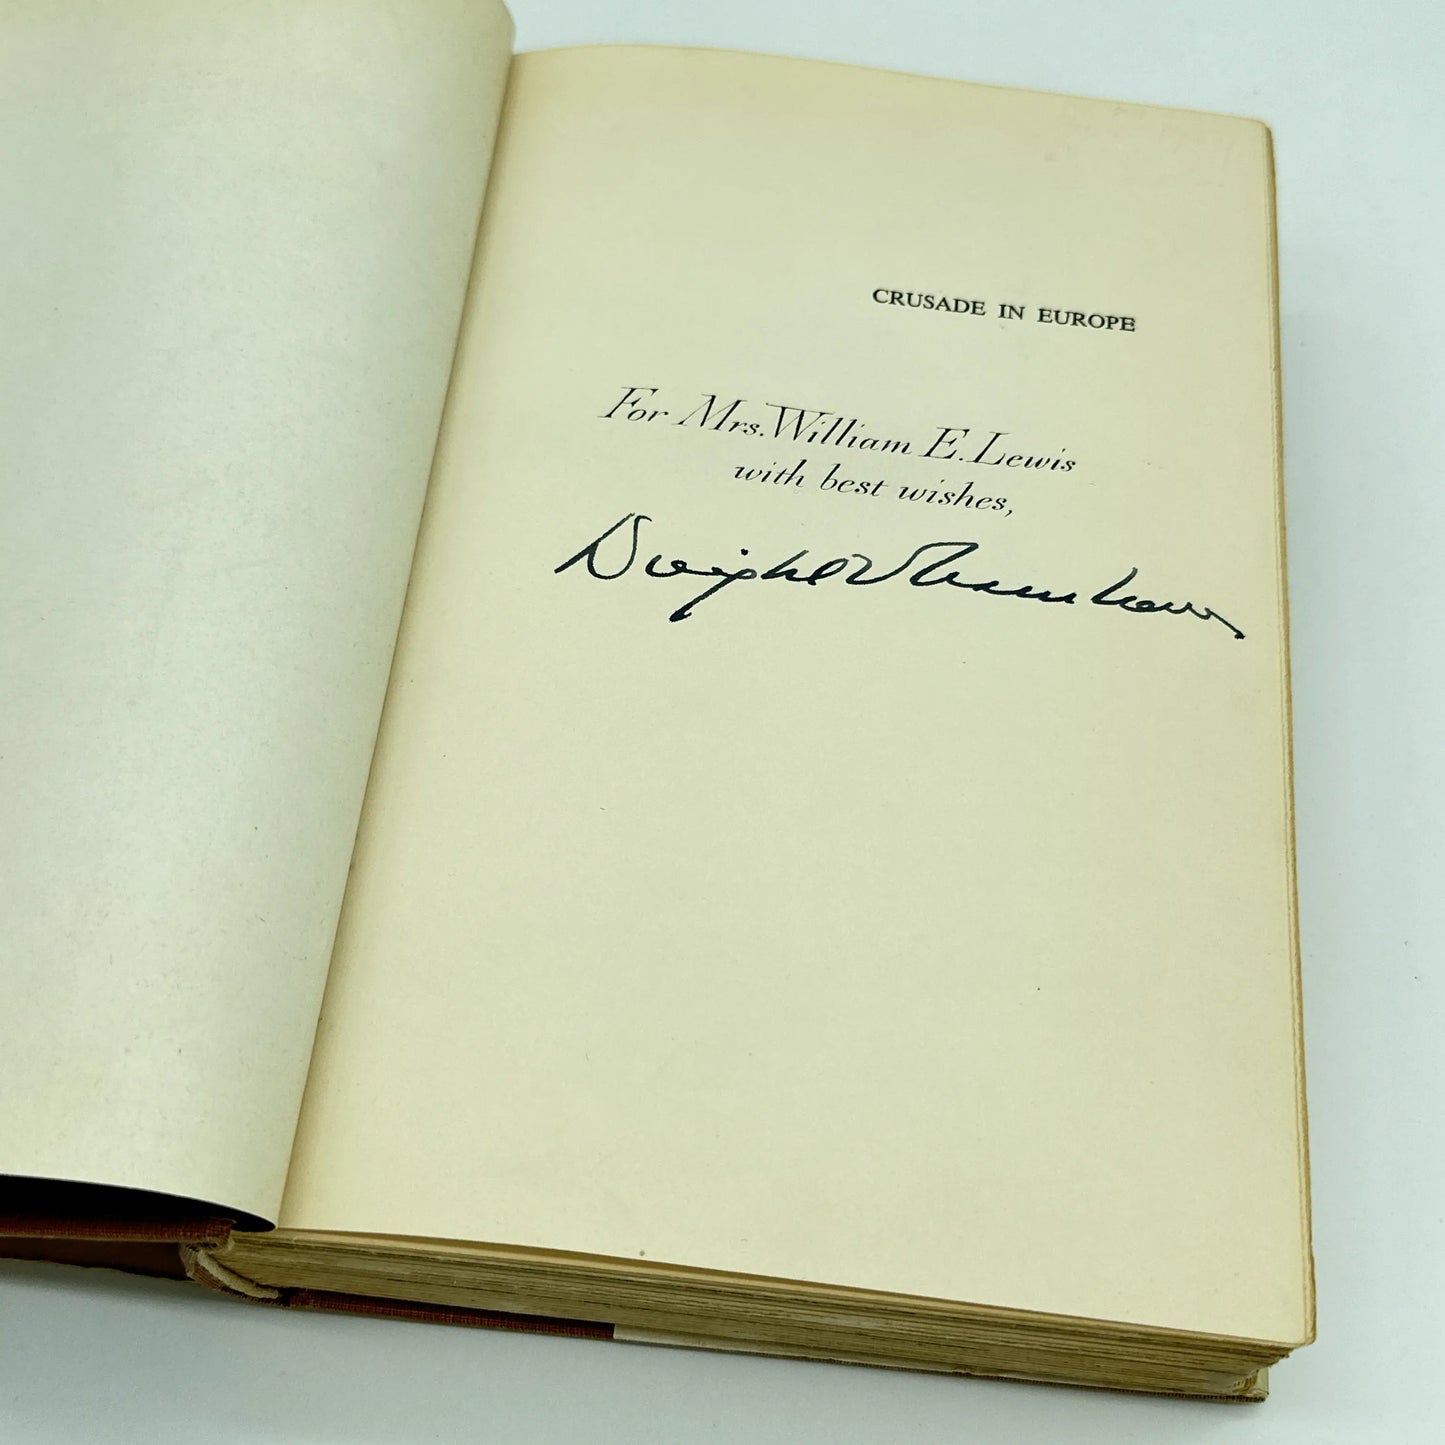 "Crusade in Europe" by Dwight D. Eisenhower — Signed copy